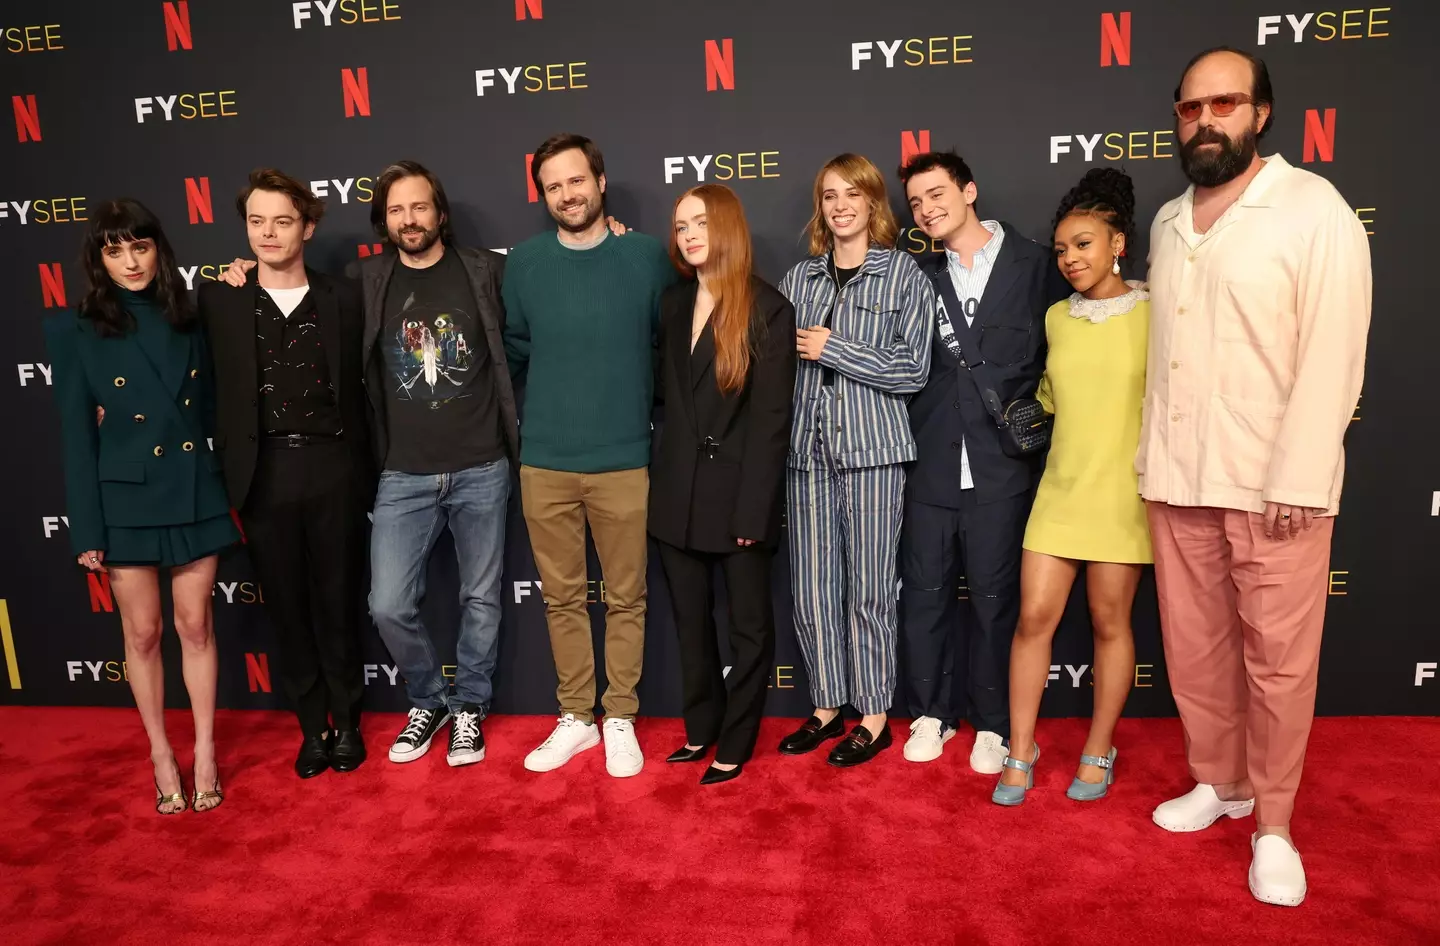 It's possible that not everyone in this picture will be back for the final season of Stranger Things.